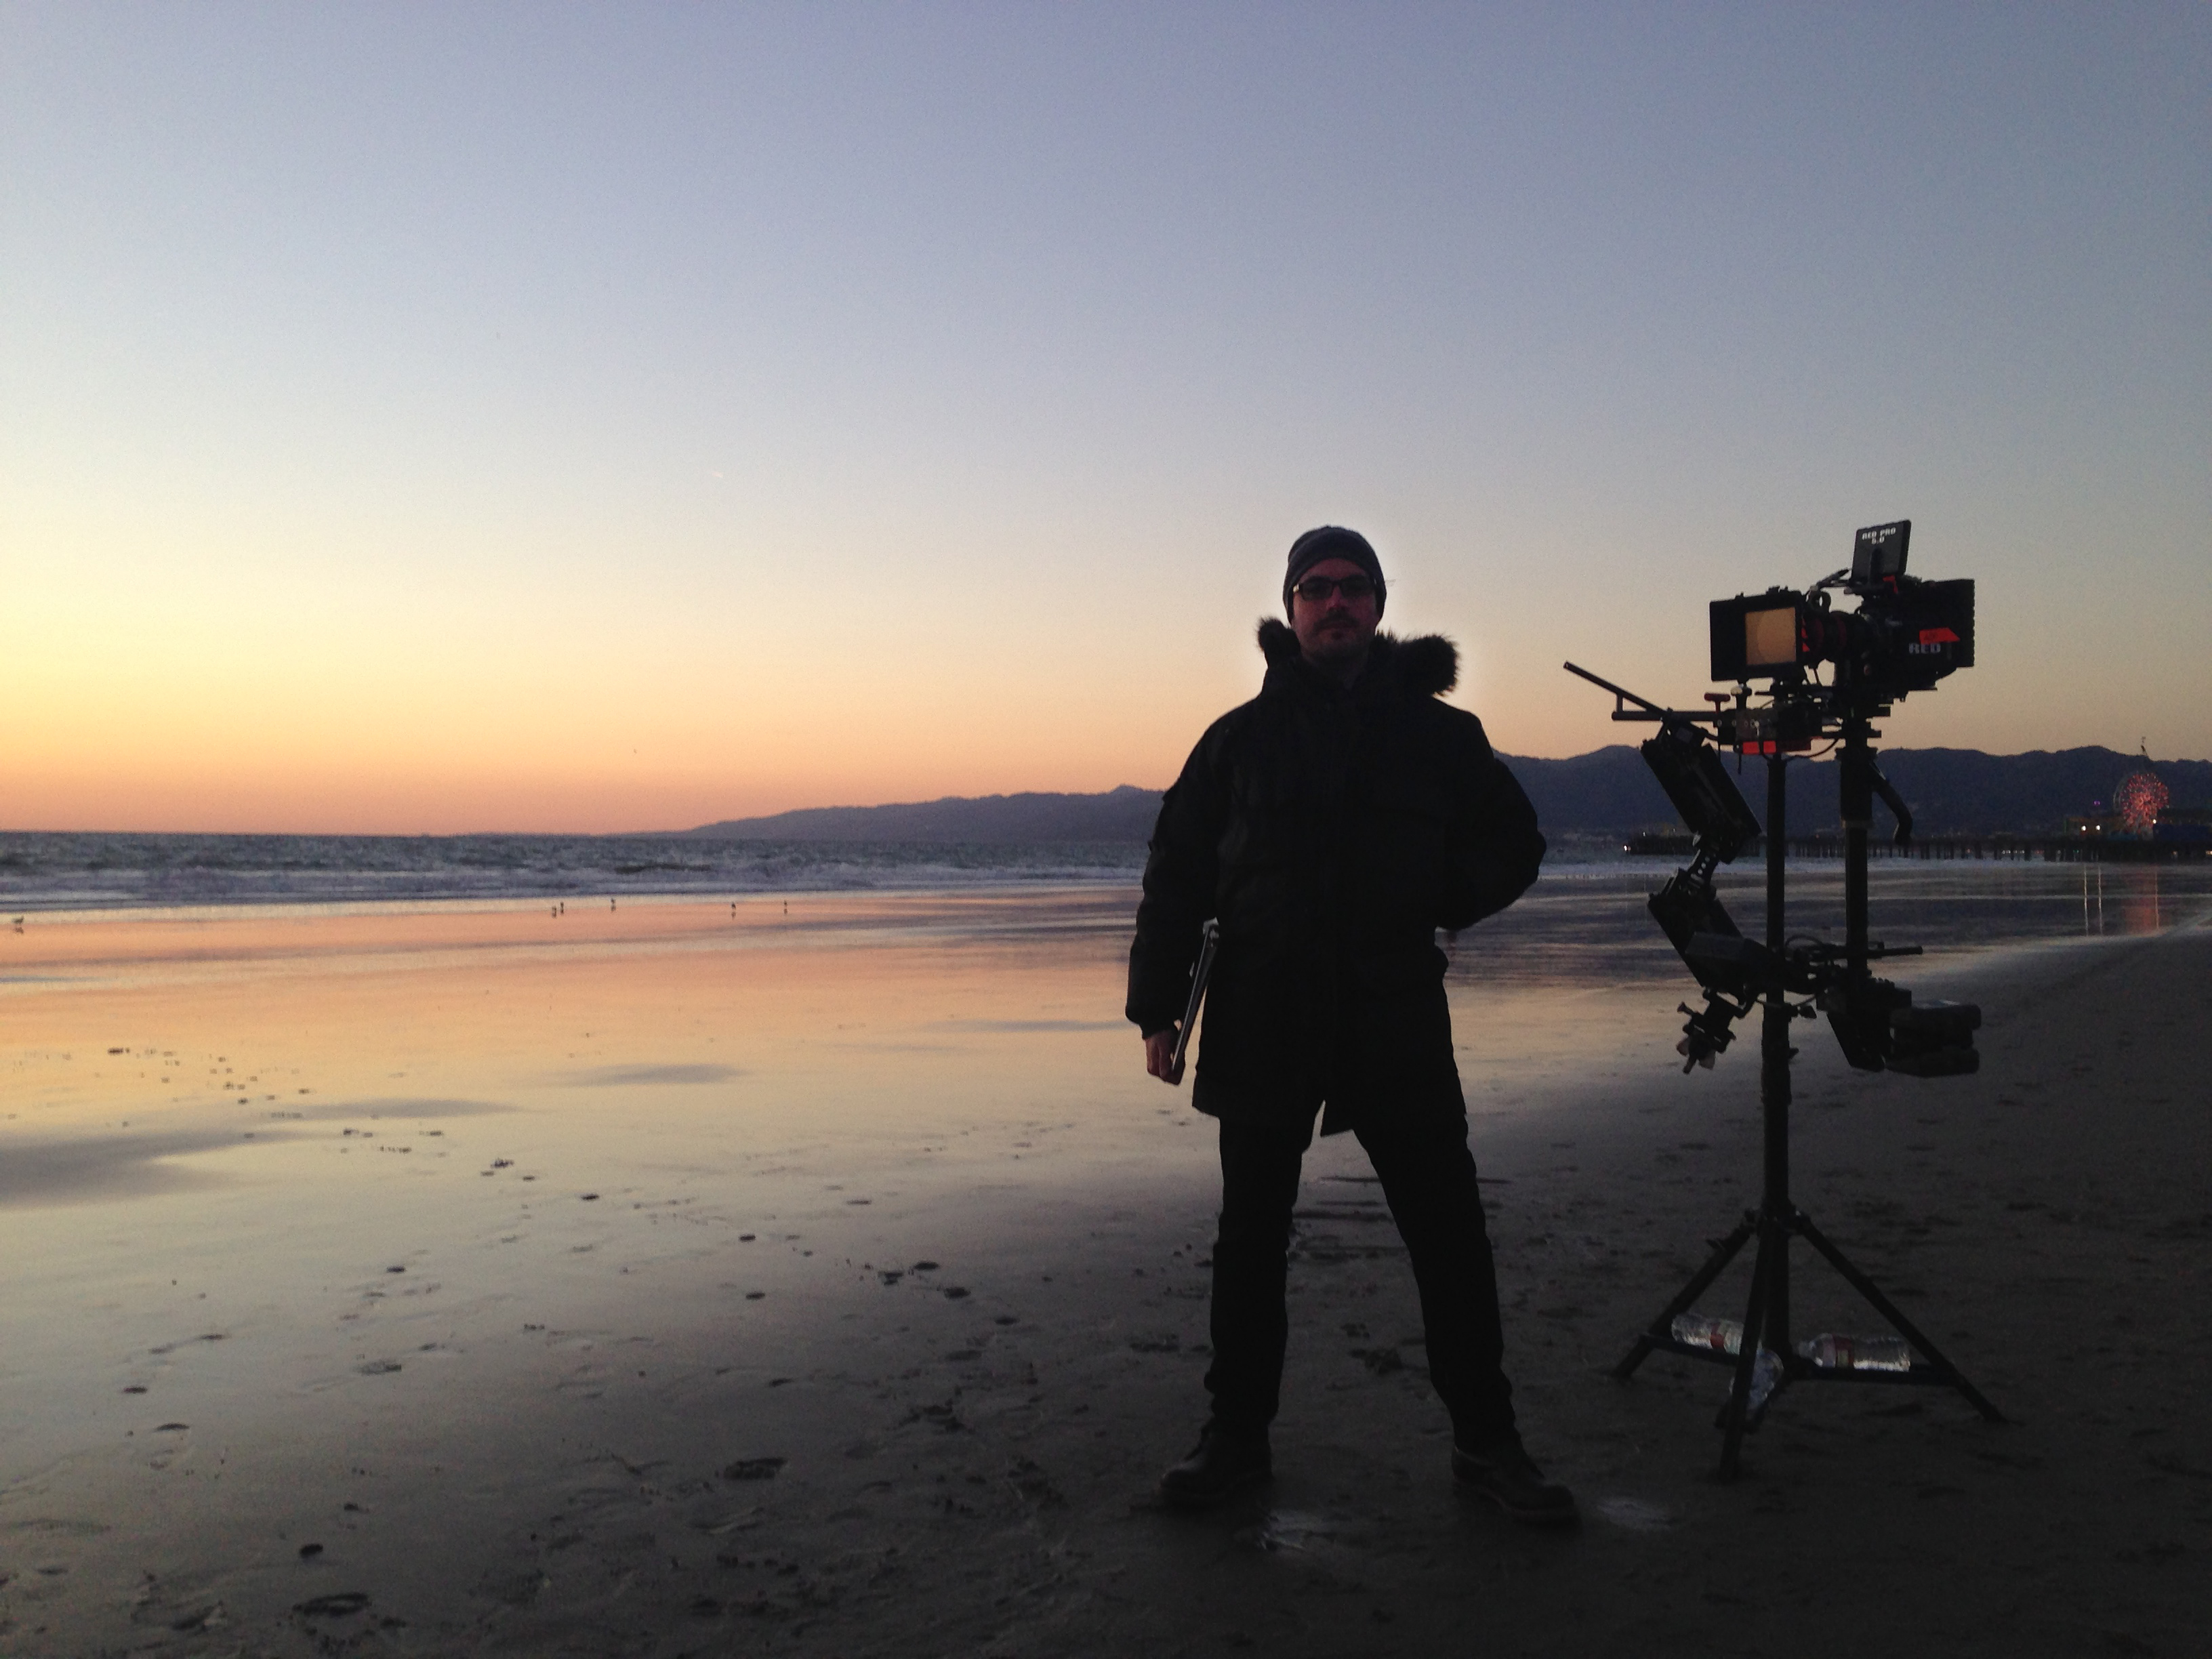 Doug Karr likes long walks on the beach... and shooting a commercial for Aéropostale on a cold eve in Santa Monica.